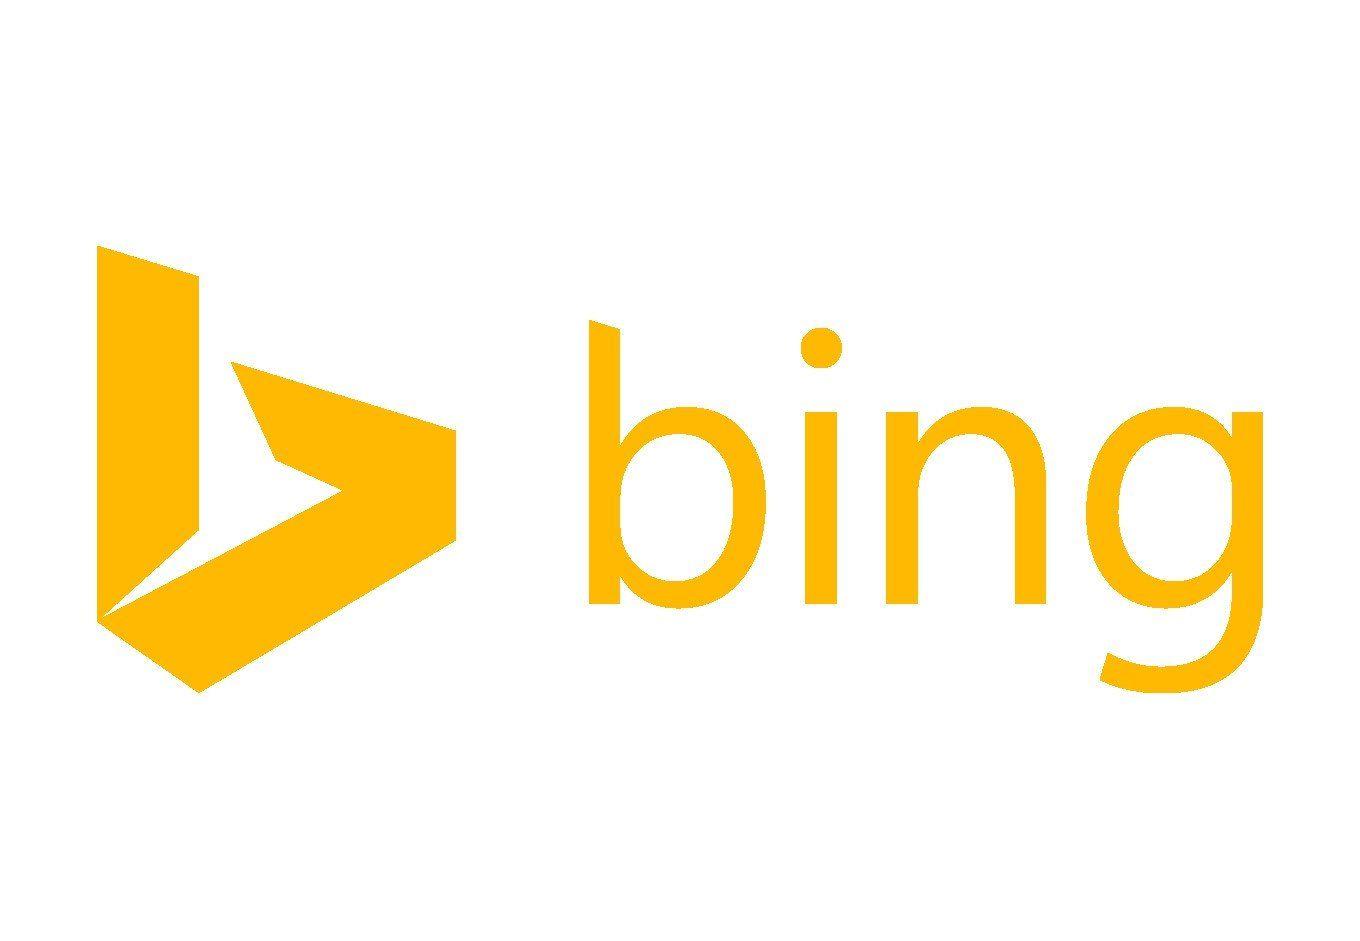 New Bing Logo - Bing introduces new modern logo to integrate the “One Microsoft